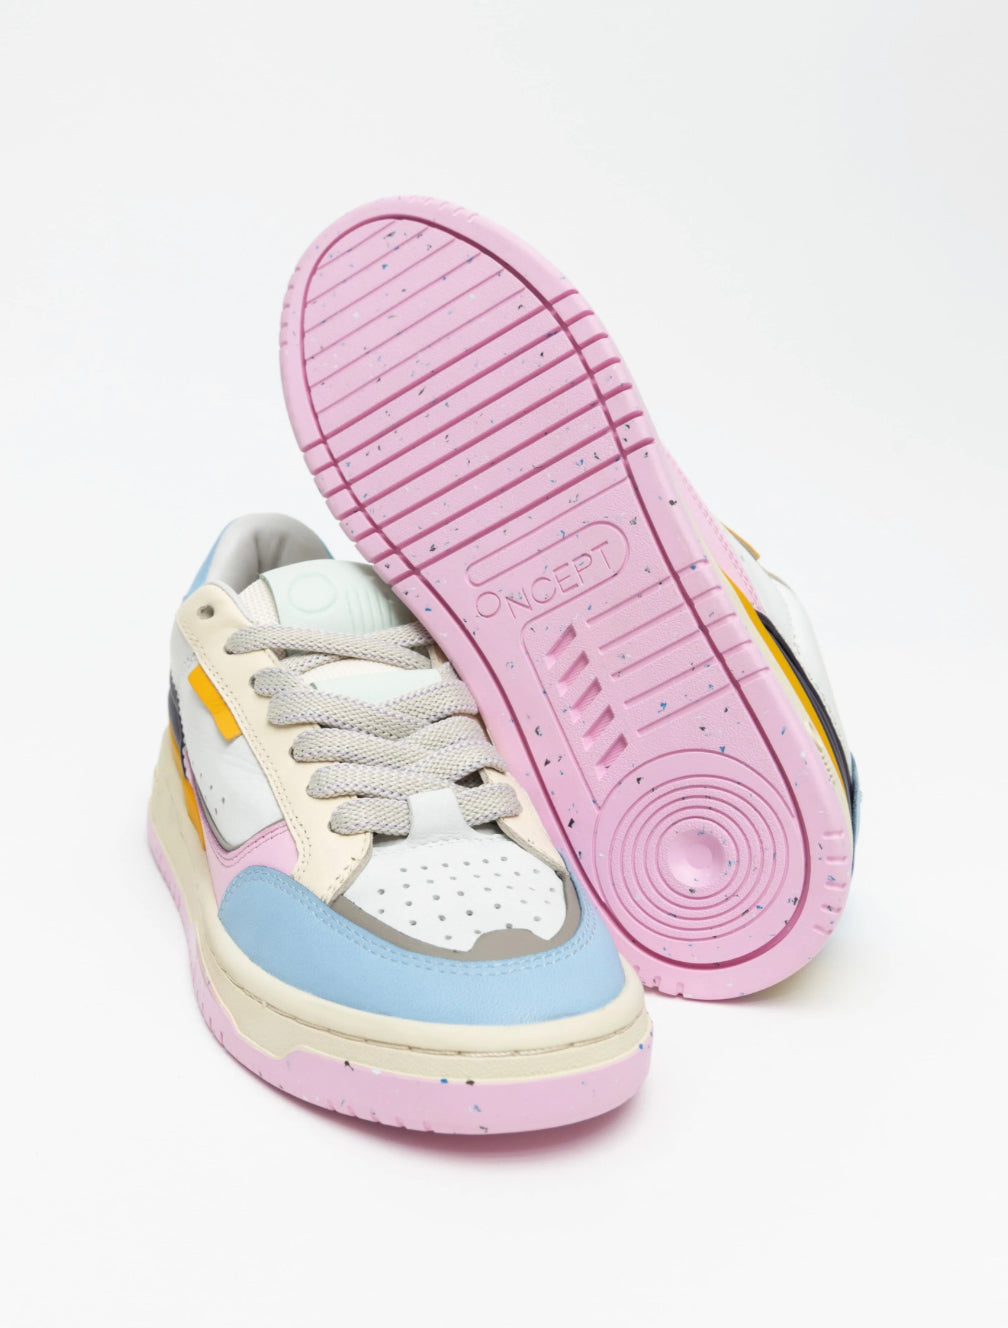 Paris Sneaker in Orchid Multi by ONCEPT